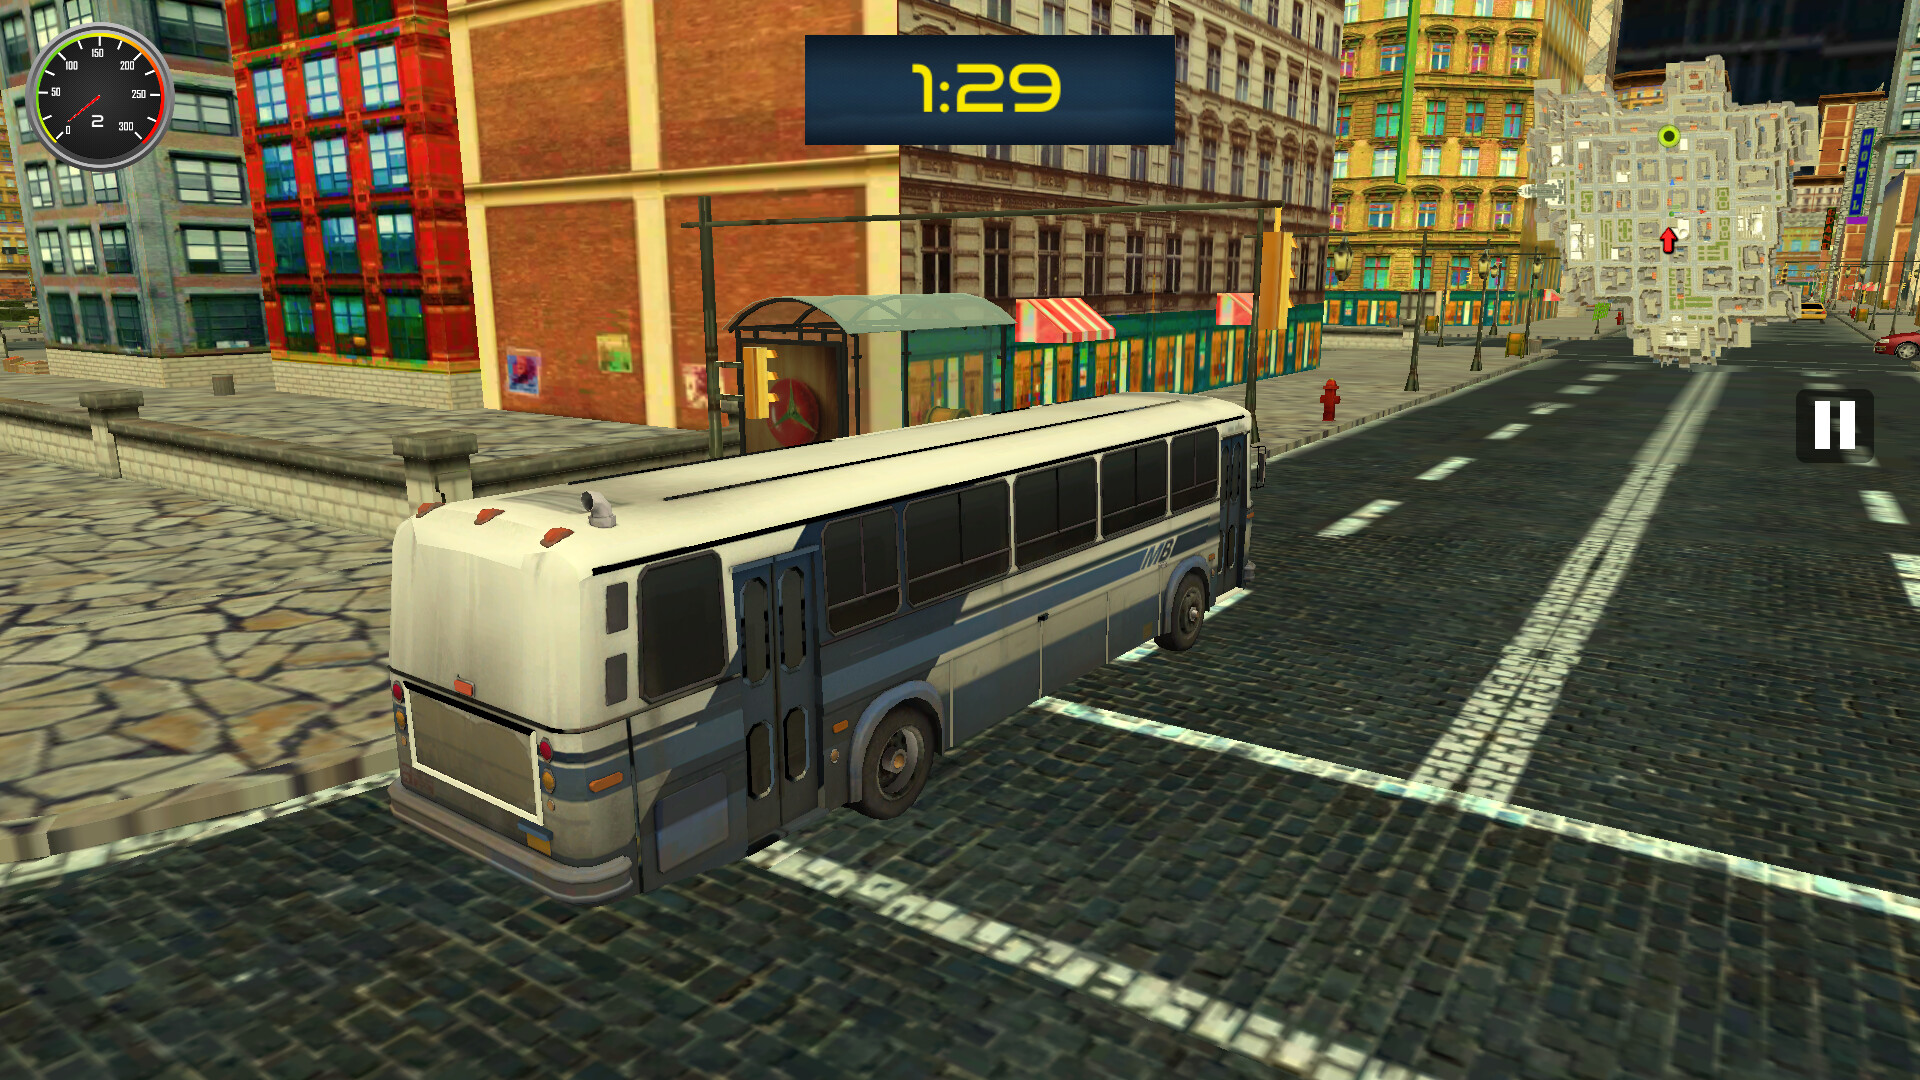 Old Town Bus Simulator on Steam